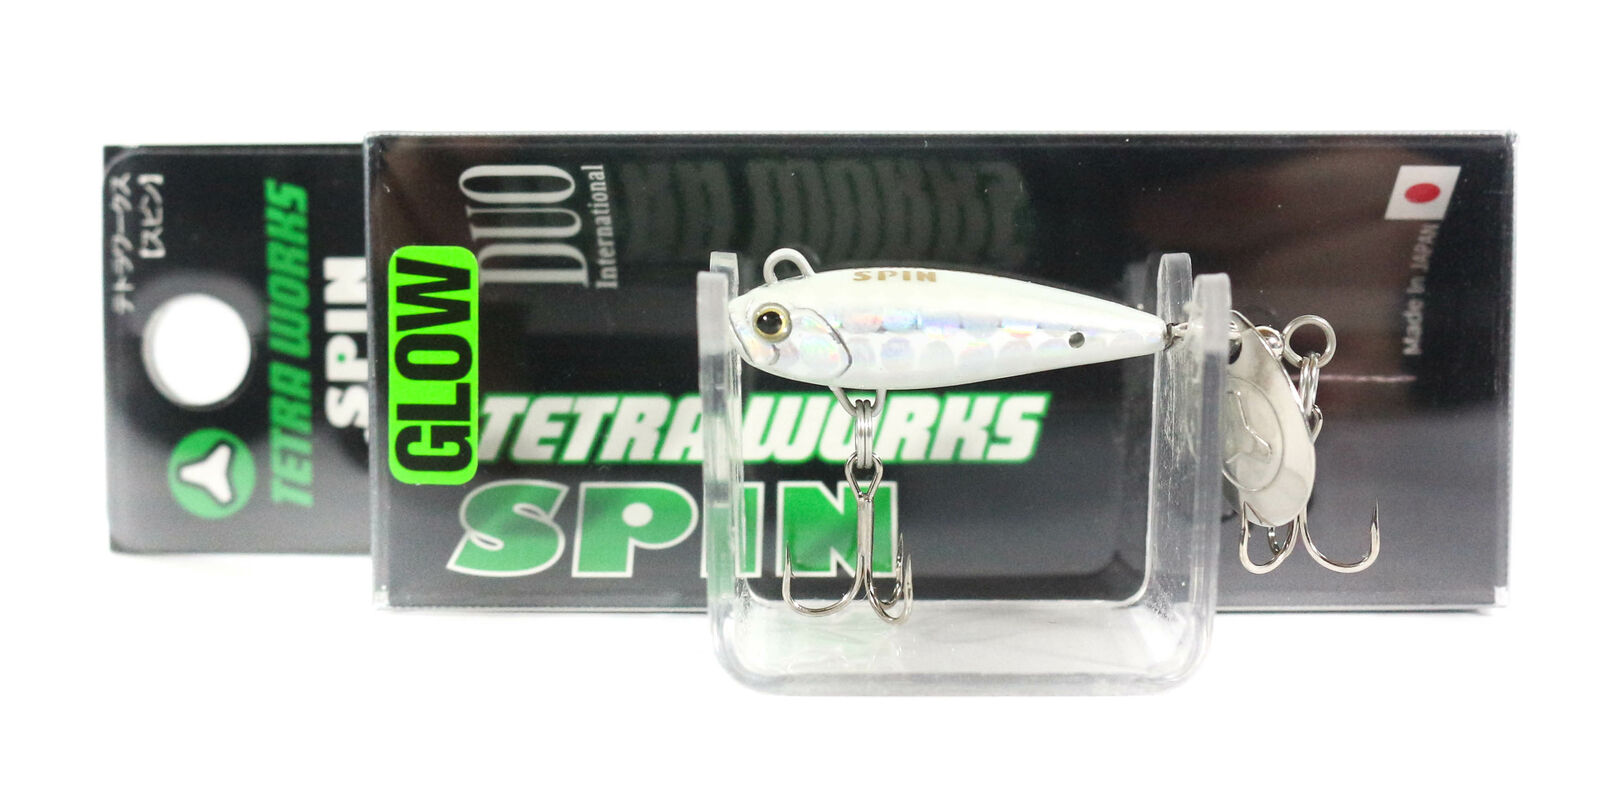 DUO TETRA WORKS SPIN 28mm 5g - Monster-Bite.com